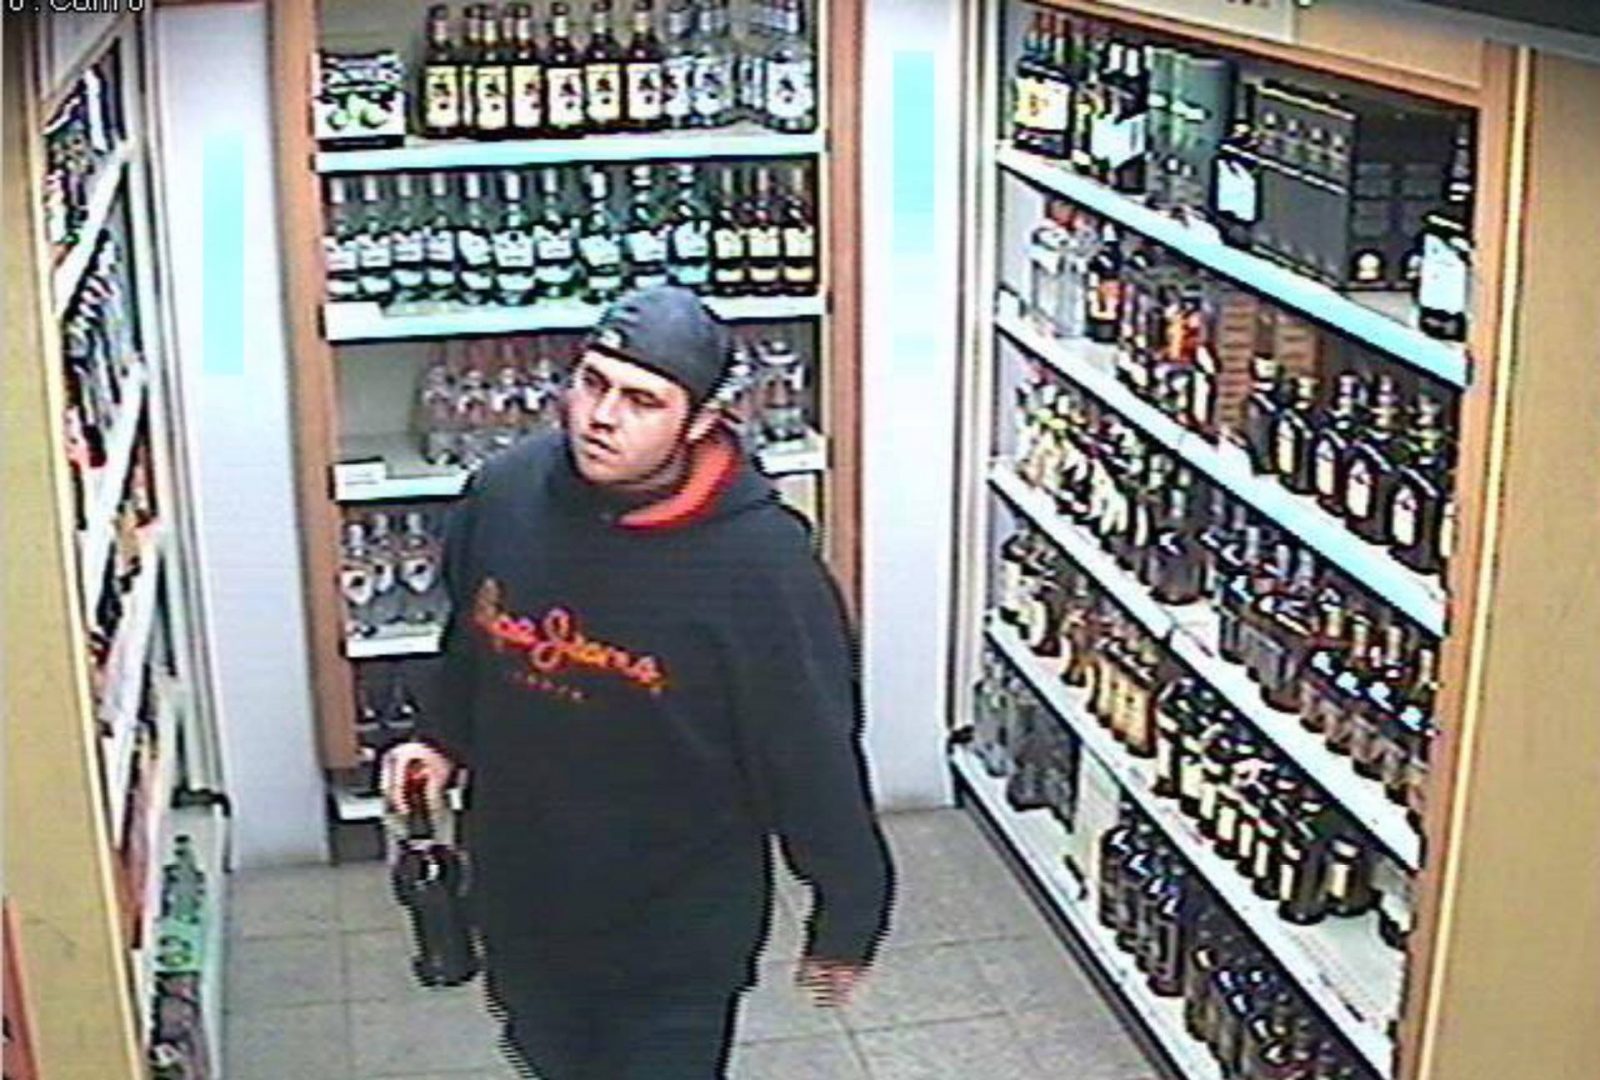 BOOZE BANDIT: Cops on the hunt for thief